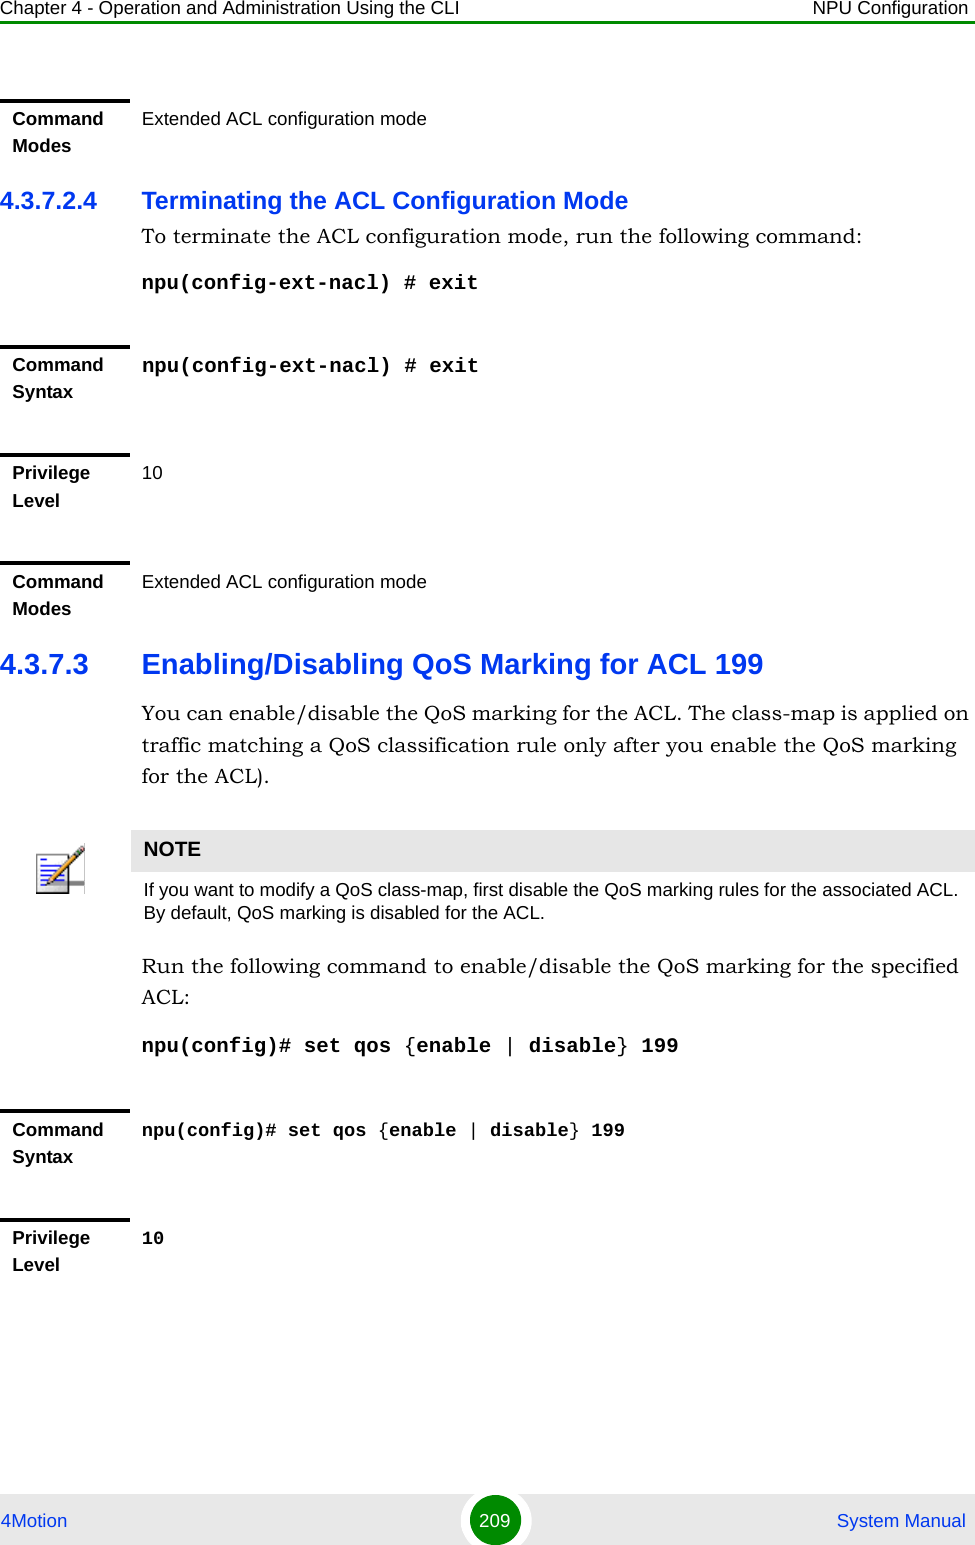 Chapter 4 - Operation and Administration Using the CLI NPU Configuration4Motion 209  System Manual4.3.7.2.4 Terminating the ACL Configuration ModeTo terminate the ACL configuration mode, run the following command:npu(config-ext-nacl) # exit4.3.7.3 Enabling/Disabling QoS Marking for ACL 199You can enable/disable the QoS marking for the ACL. The class-map is applied on traffic matching a QoS classification rule only after you enable the QoS marking for the ACL).Run the following command to enable/disable the QoS marking for the specified ACL:npu(config)# set qos {enable | disable} 199 Command ModesExtended ACL configuration modeCommand Syntaxnpu(config-ext-nacl) # exitPrivilege Level10Command ModesExtended ACL configuration modeNOTEIf you want to modify a QoS class-map, first disable the QoS marking rules for the associated ACL. By default, QoS marking is disabled for the ACL. Command Syntaxnpu(config)# set qos {enable | disable} 199Privilege Level10